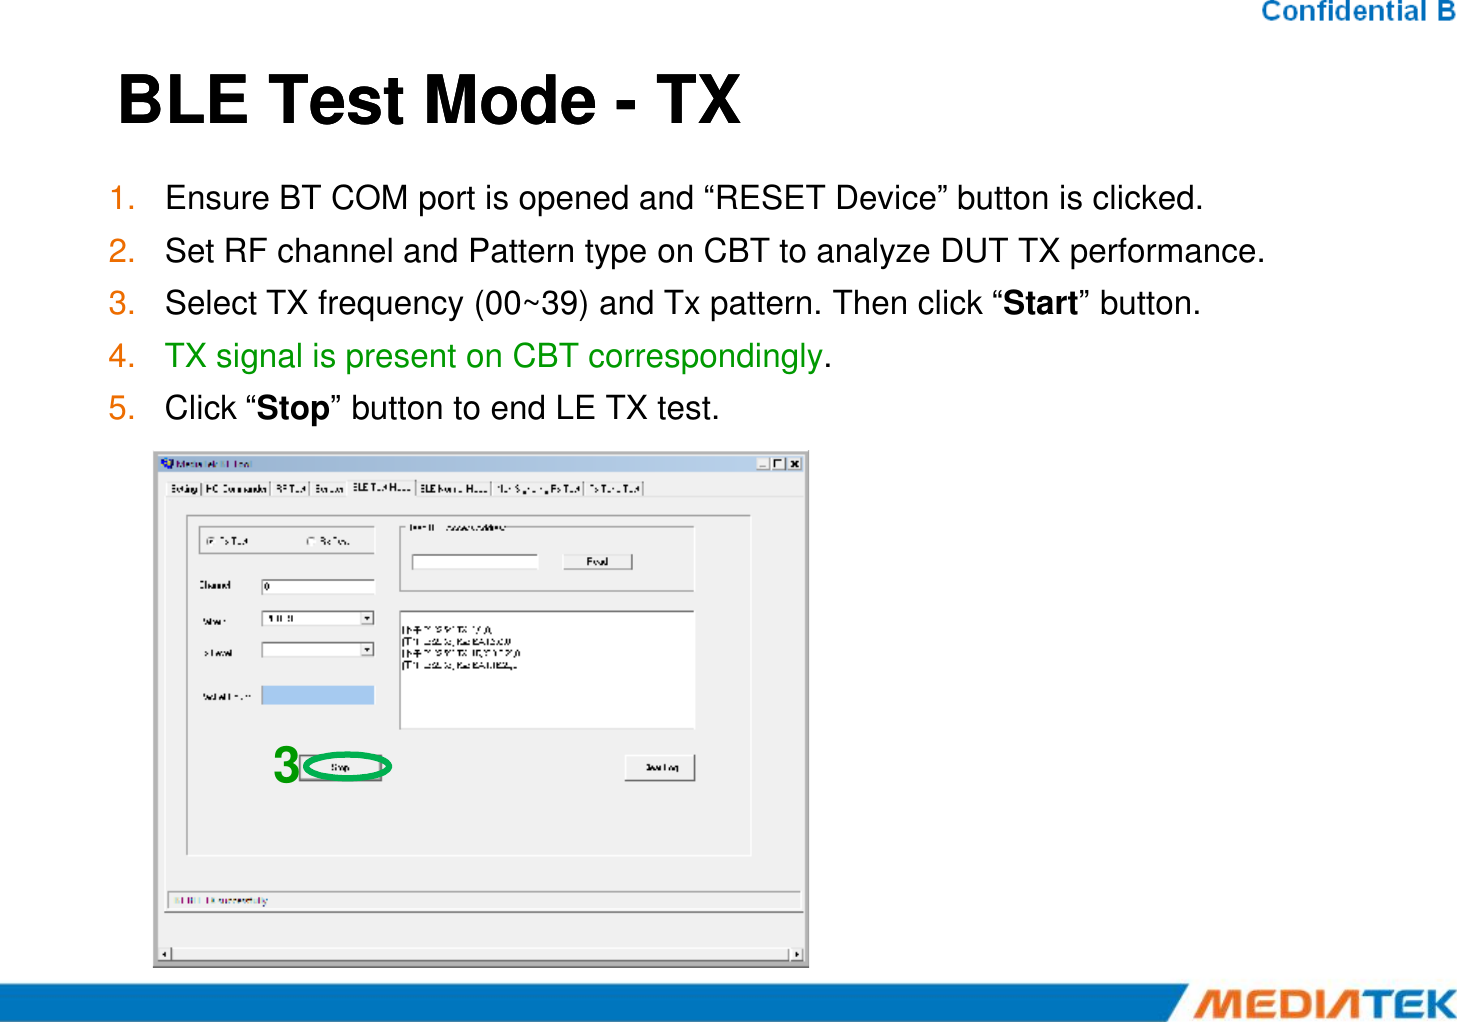 BLE Test Mode BLE Test Mode --TXTX1. Ensure BT COM port is opened and “RESET Device” button is clicked.2. Set RF channel and Pattern type on CBT to analyze DUT TX performance.3. Select TX frequency (00~39) and Tx pattern. Then click “Start” button.4. TX signal is present on CBT correspondingly.5. Click “Stop” button to end LE TX test.3